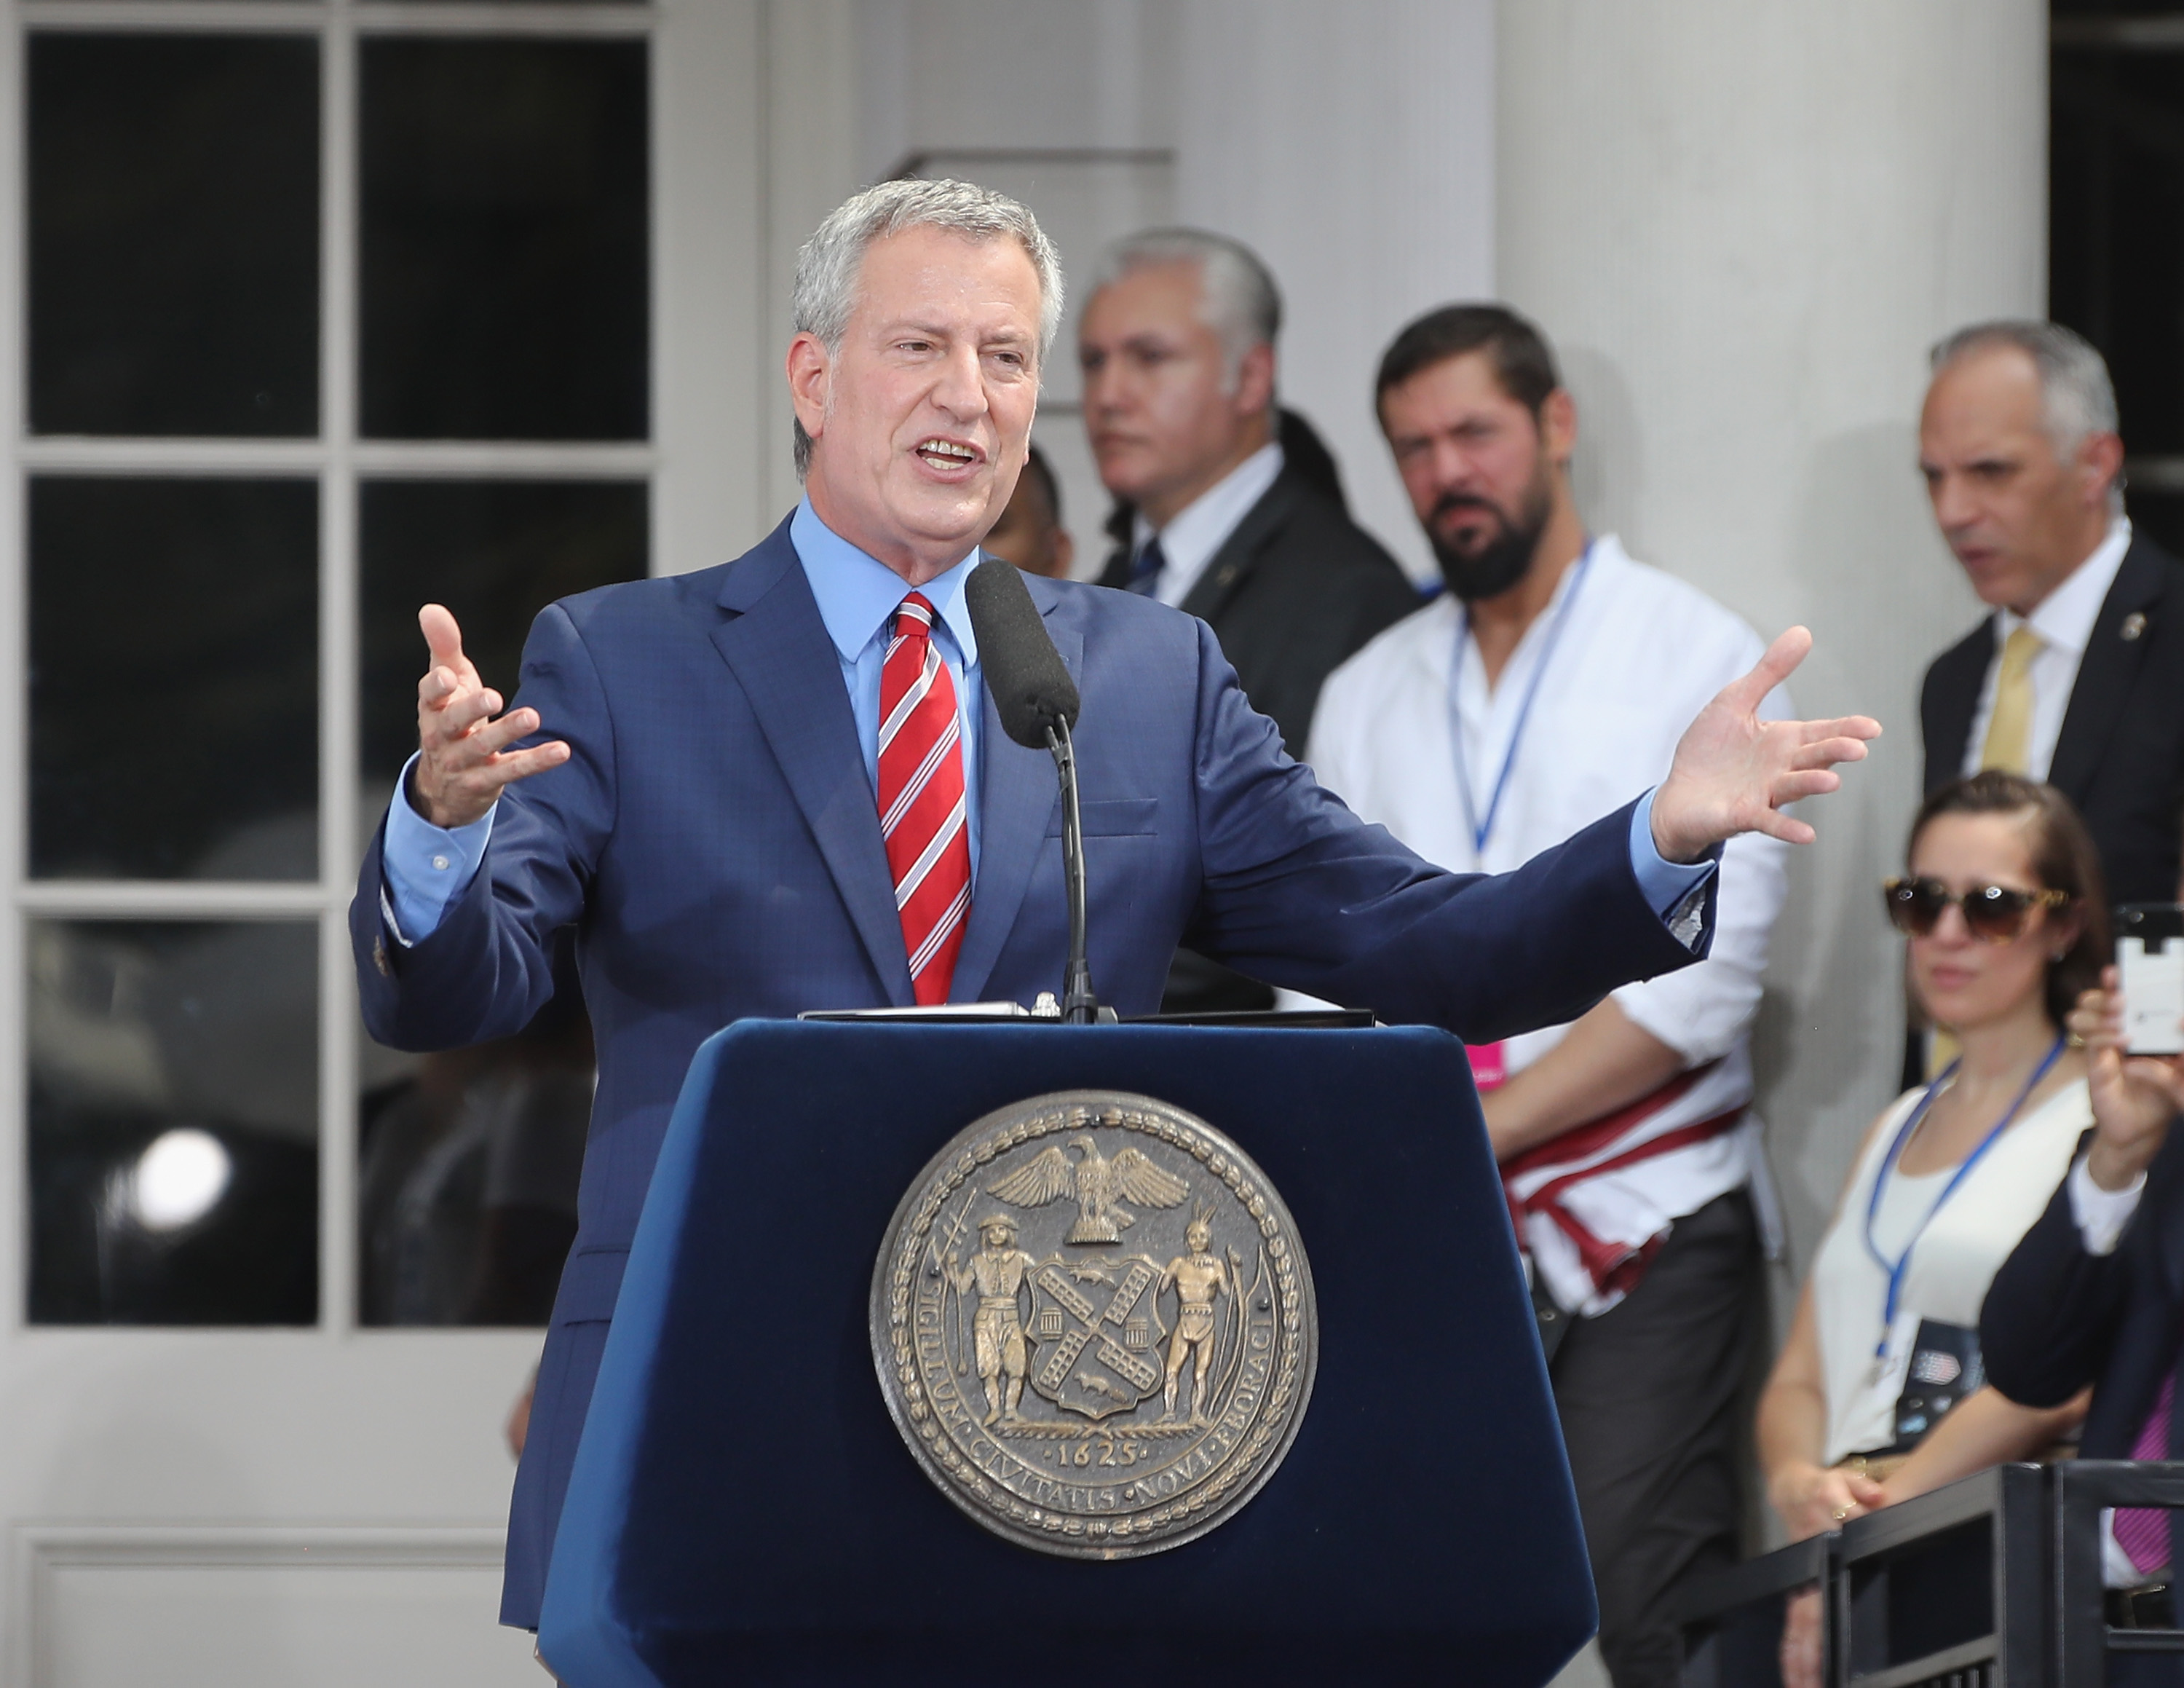 Mayor Bill de Blasio speaks at a ceremony honoring the members of the United States Women's National Soccer Team at City Hall on July 10, 2019 in New York City. The honor followed a ticker tape parade up lower Manhattan's "Canyon of Heroes" to celebrate their gold medal victory in the 2019 Women's World Cup in France. (Bruce Bennett—Getty Images)